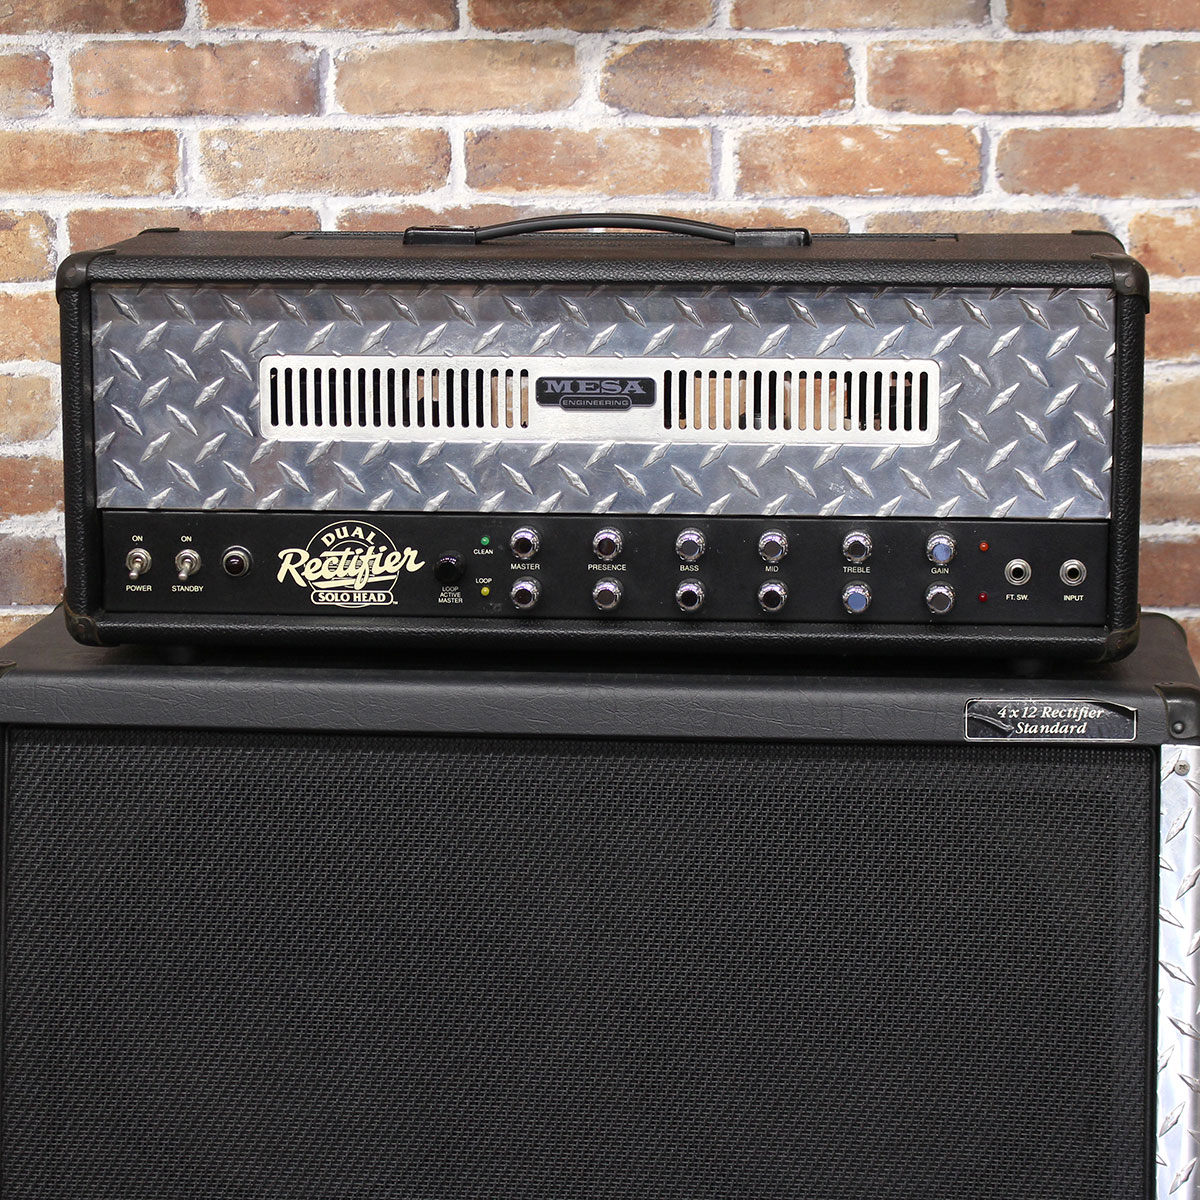 1992 Mesa Boogie Dual Rectifier Solo Head Black Chassis ”Revision D” ＆ 4FB Armor Cabinet - 3.jpg